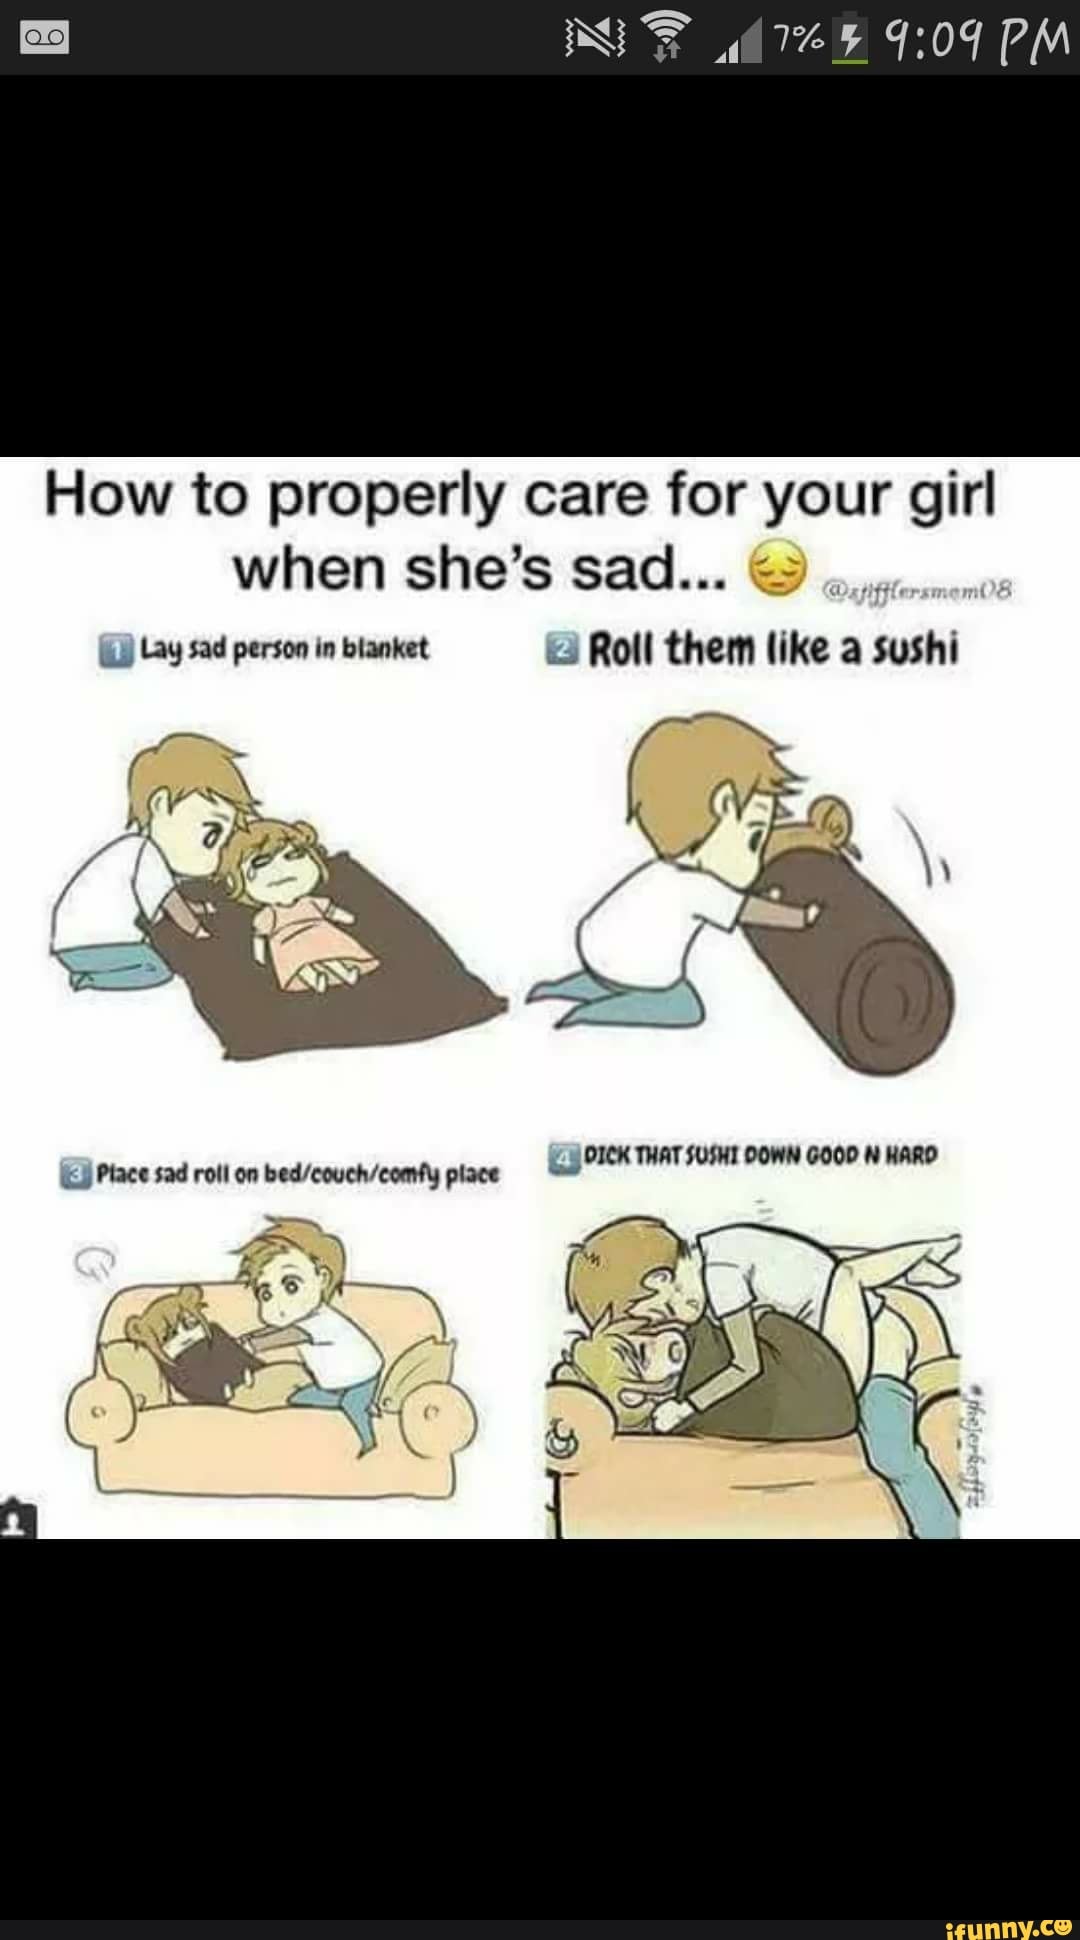 How to properly care for your girl when she’s sad m ug sad person m blank&q...